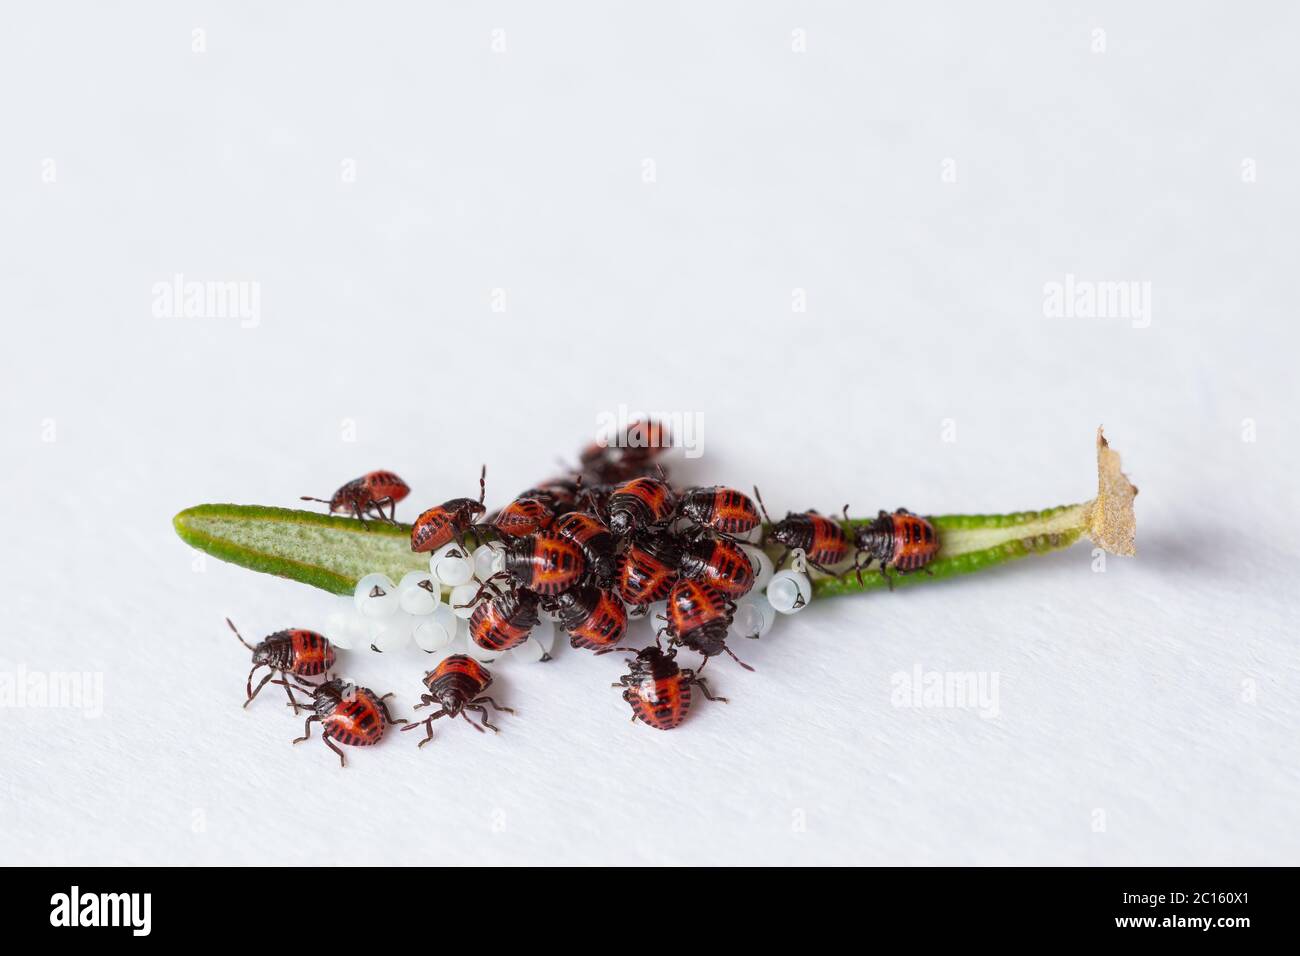 Hatch eggs and young newborn bedbugs (orange, red) (Halyomorpha halys) over a rosemary leaf. East Asian native insect. Stock Photo